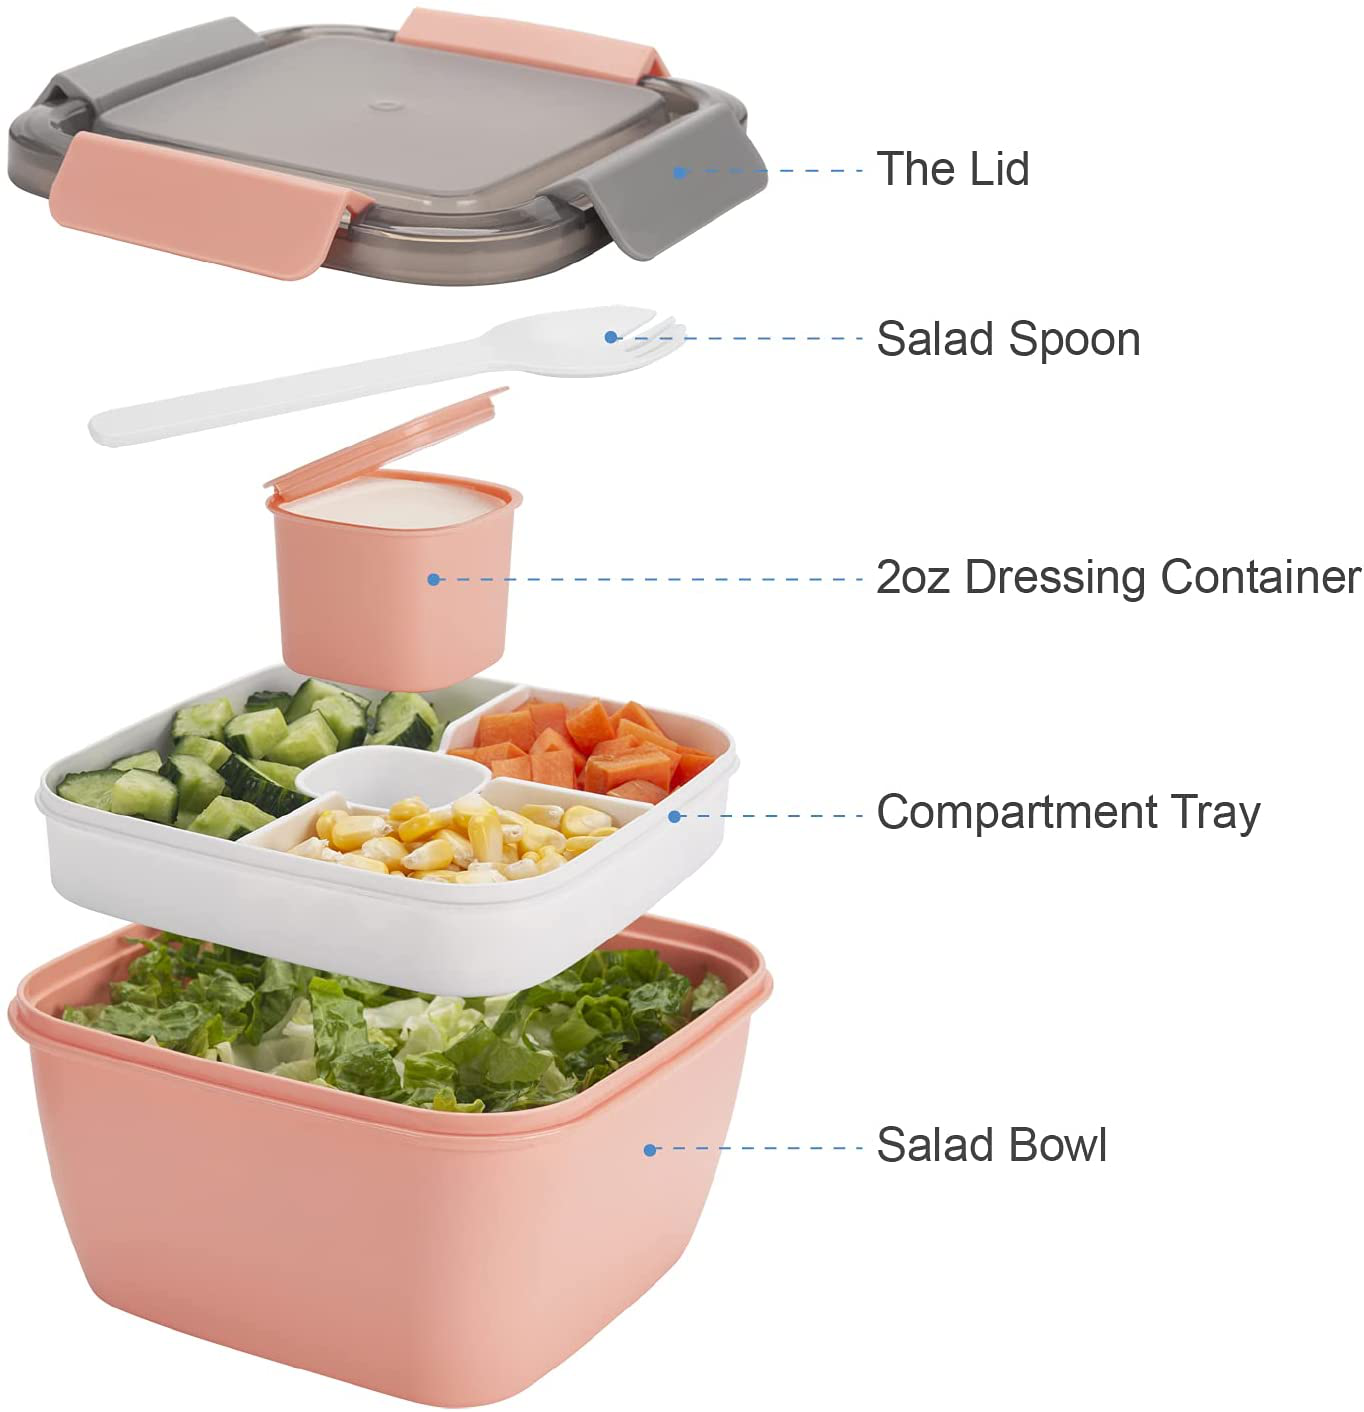 Freshmage Salad Lunch Container To Go, 52-oz Salad Bowls with 3 Compartments, Salad Dressings Container for Salad Toppings, Snacks, Men, Women (Purple)